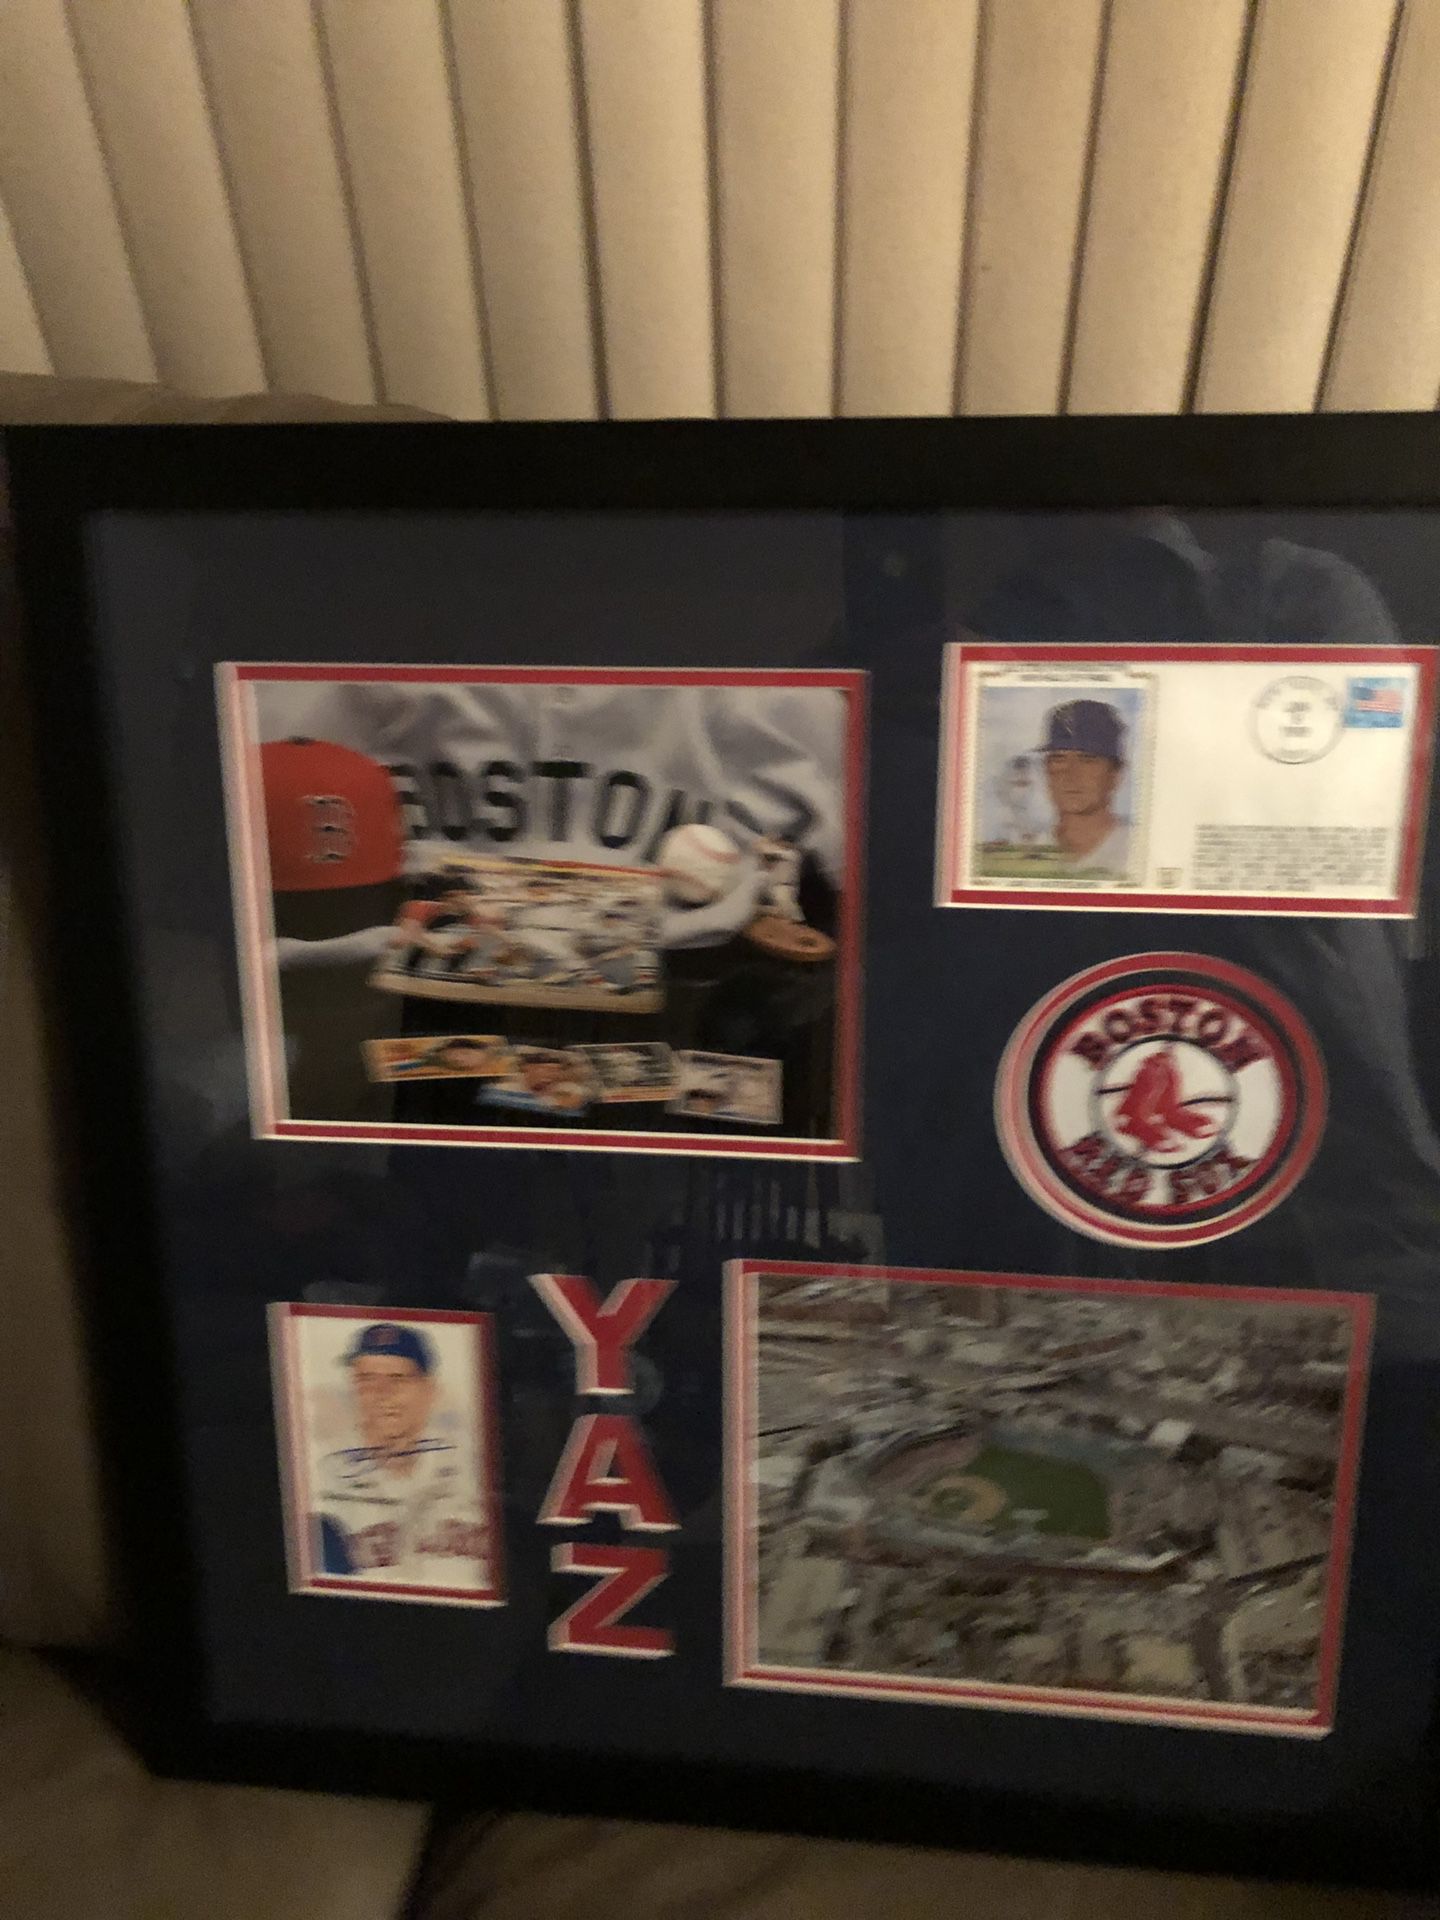 Autographed Carl “YAZ” Yastrzemski Hall of Fame Outfielder of the Boston Red Sox Collage includes special Fenway Park And Boston Red Sox 8x10’s, an